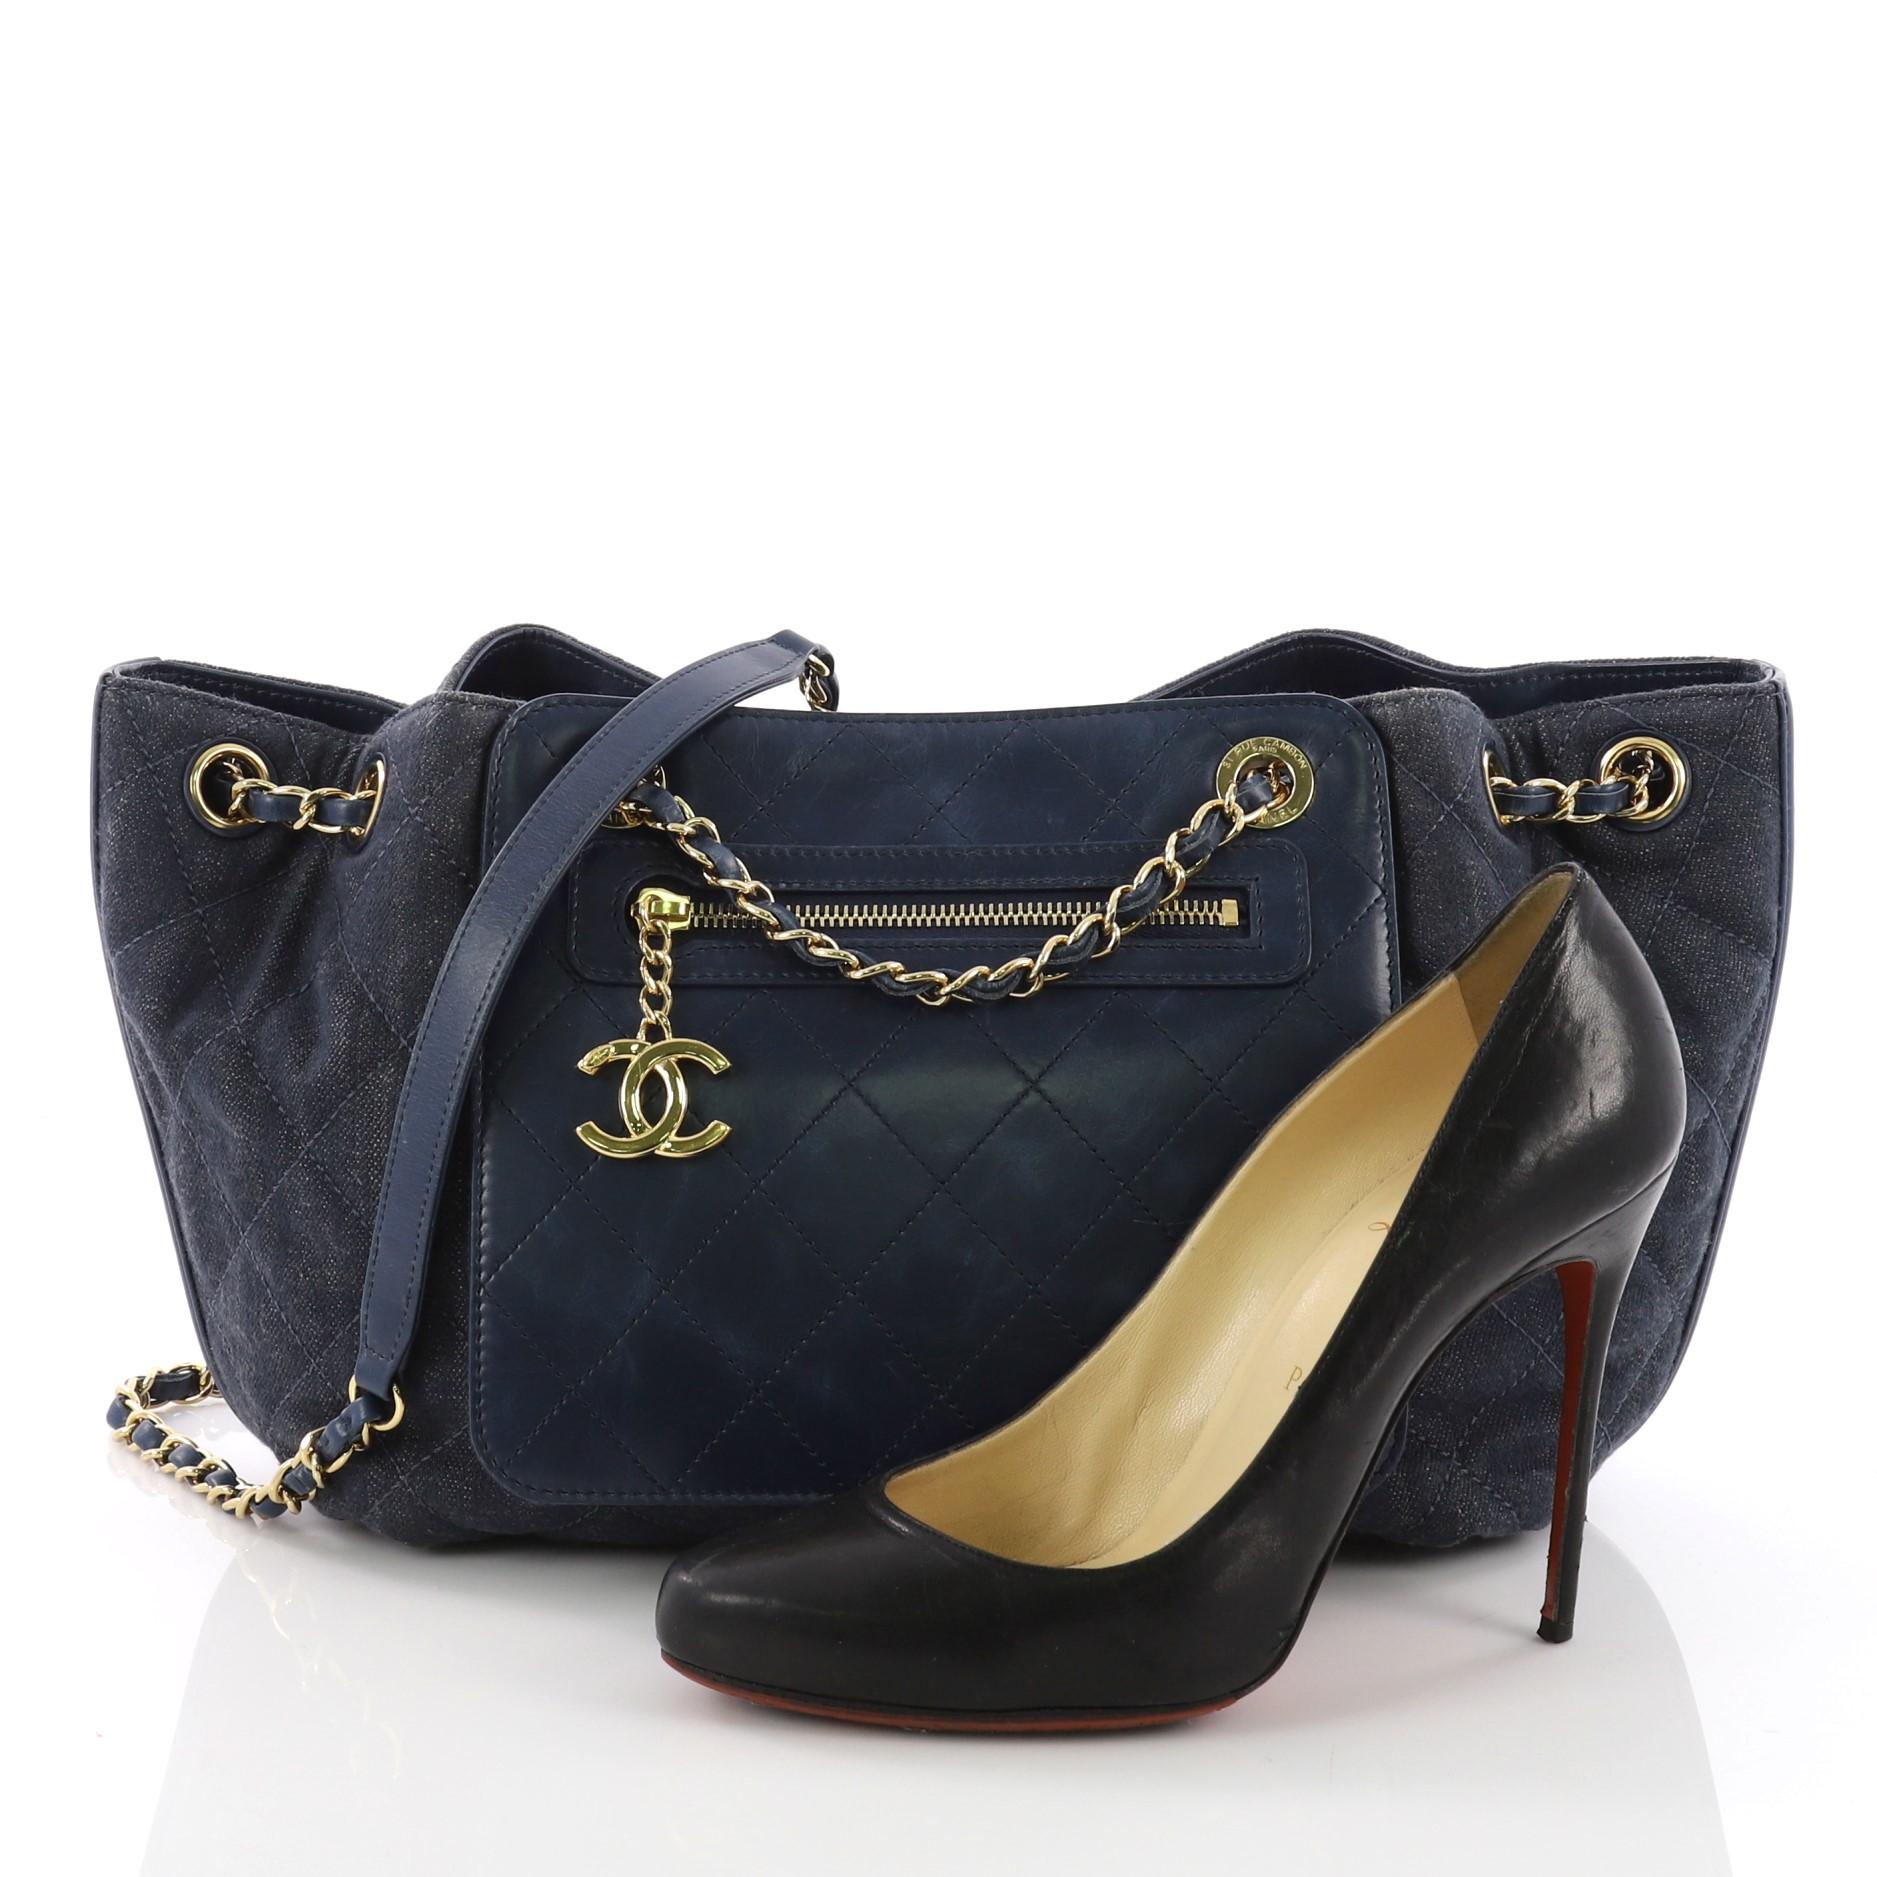 This Chanel Drawstring Shoulder Bag Quilted Denim and Aged Calfskin Medium, crafted from blue quilted denim and aged calfskin, features woven-in leather chain straps with leather shoulder pad, exterior front zip pocket, and gold-tone hardware. Its